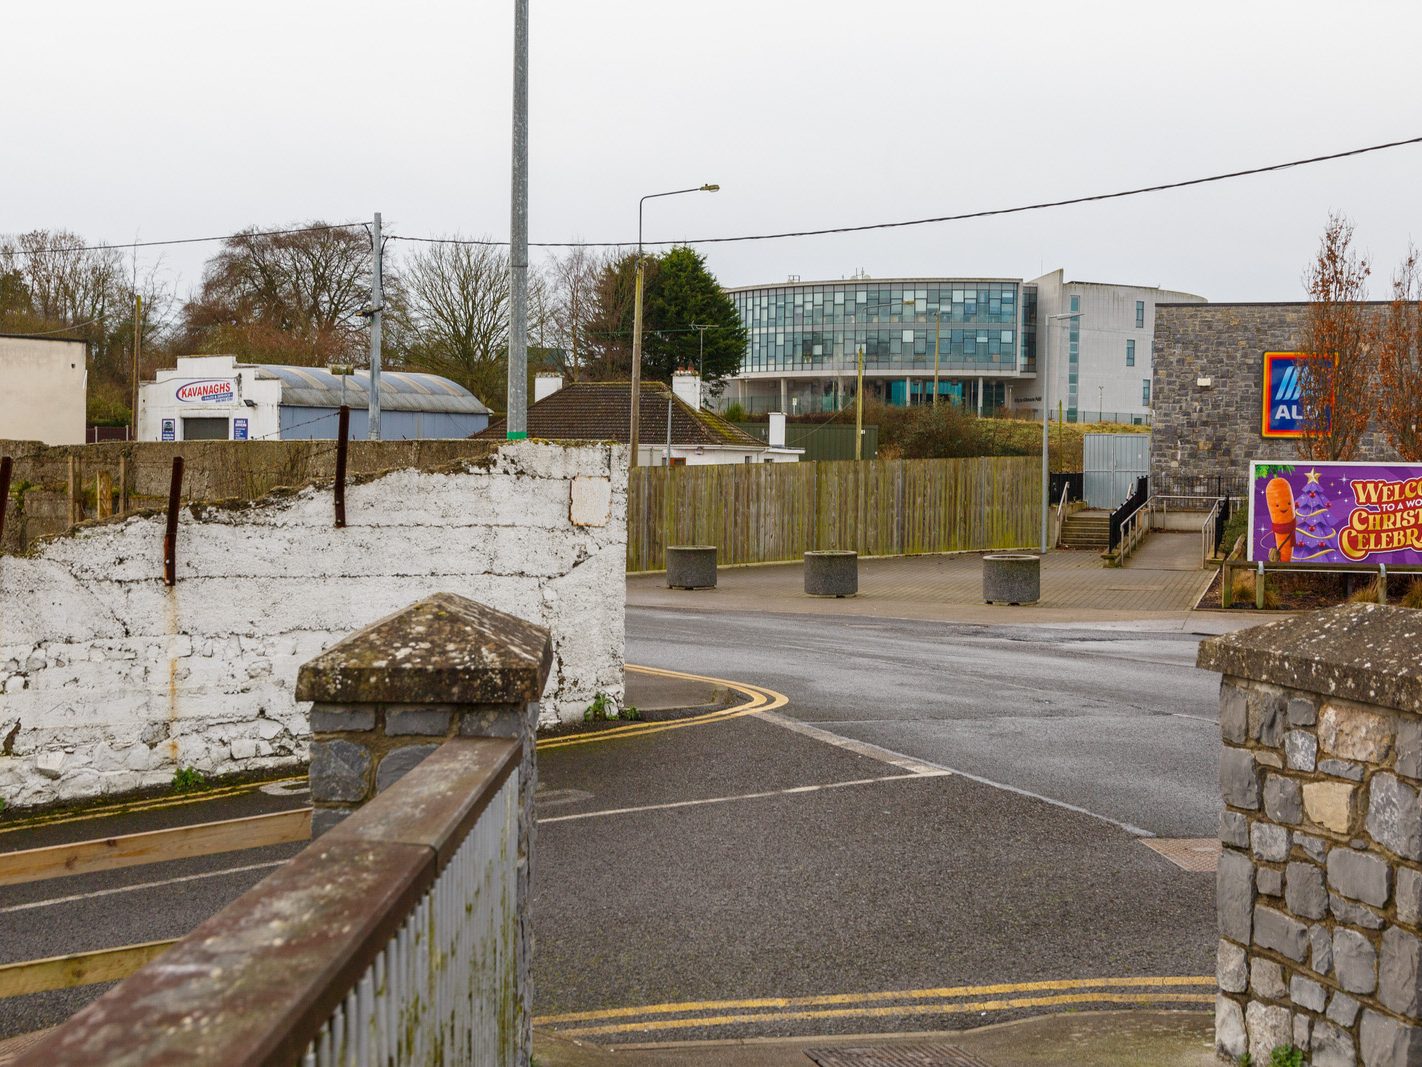 WATERGATE STREET AND WATERGATE BRIDGE [THE TOWN OF TRIM IN COUNTY MEATH]-226461-1